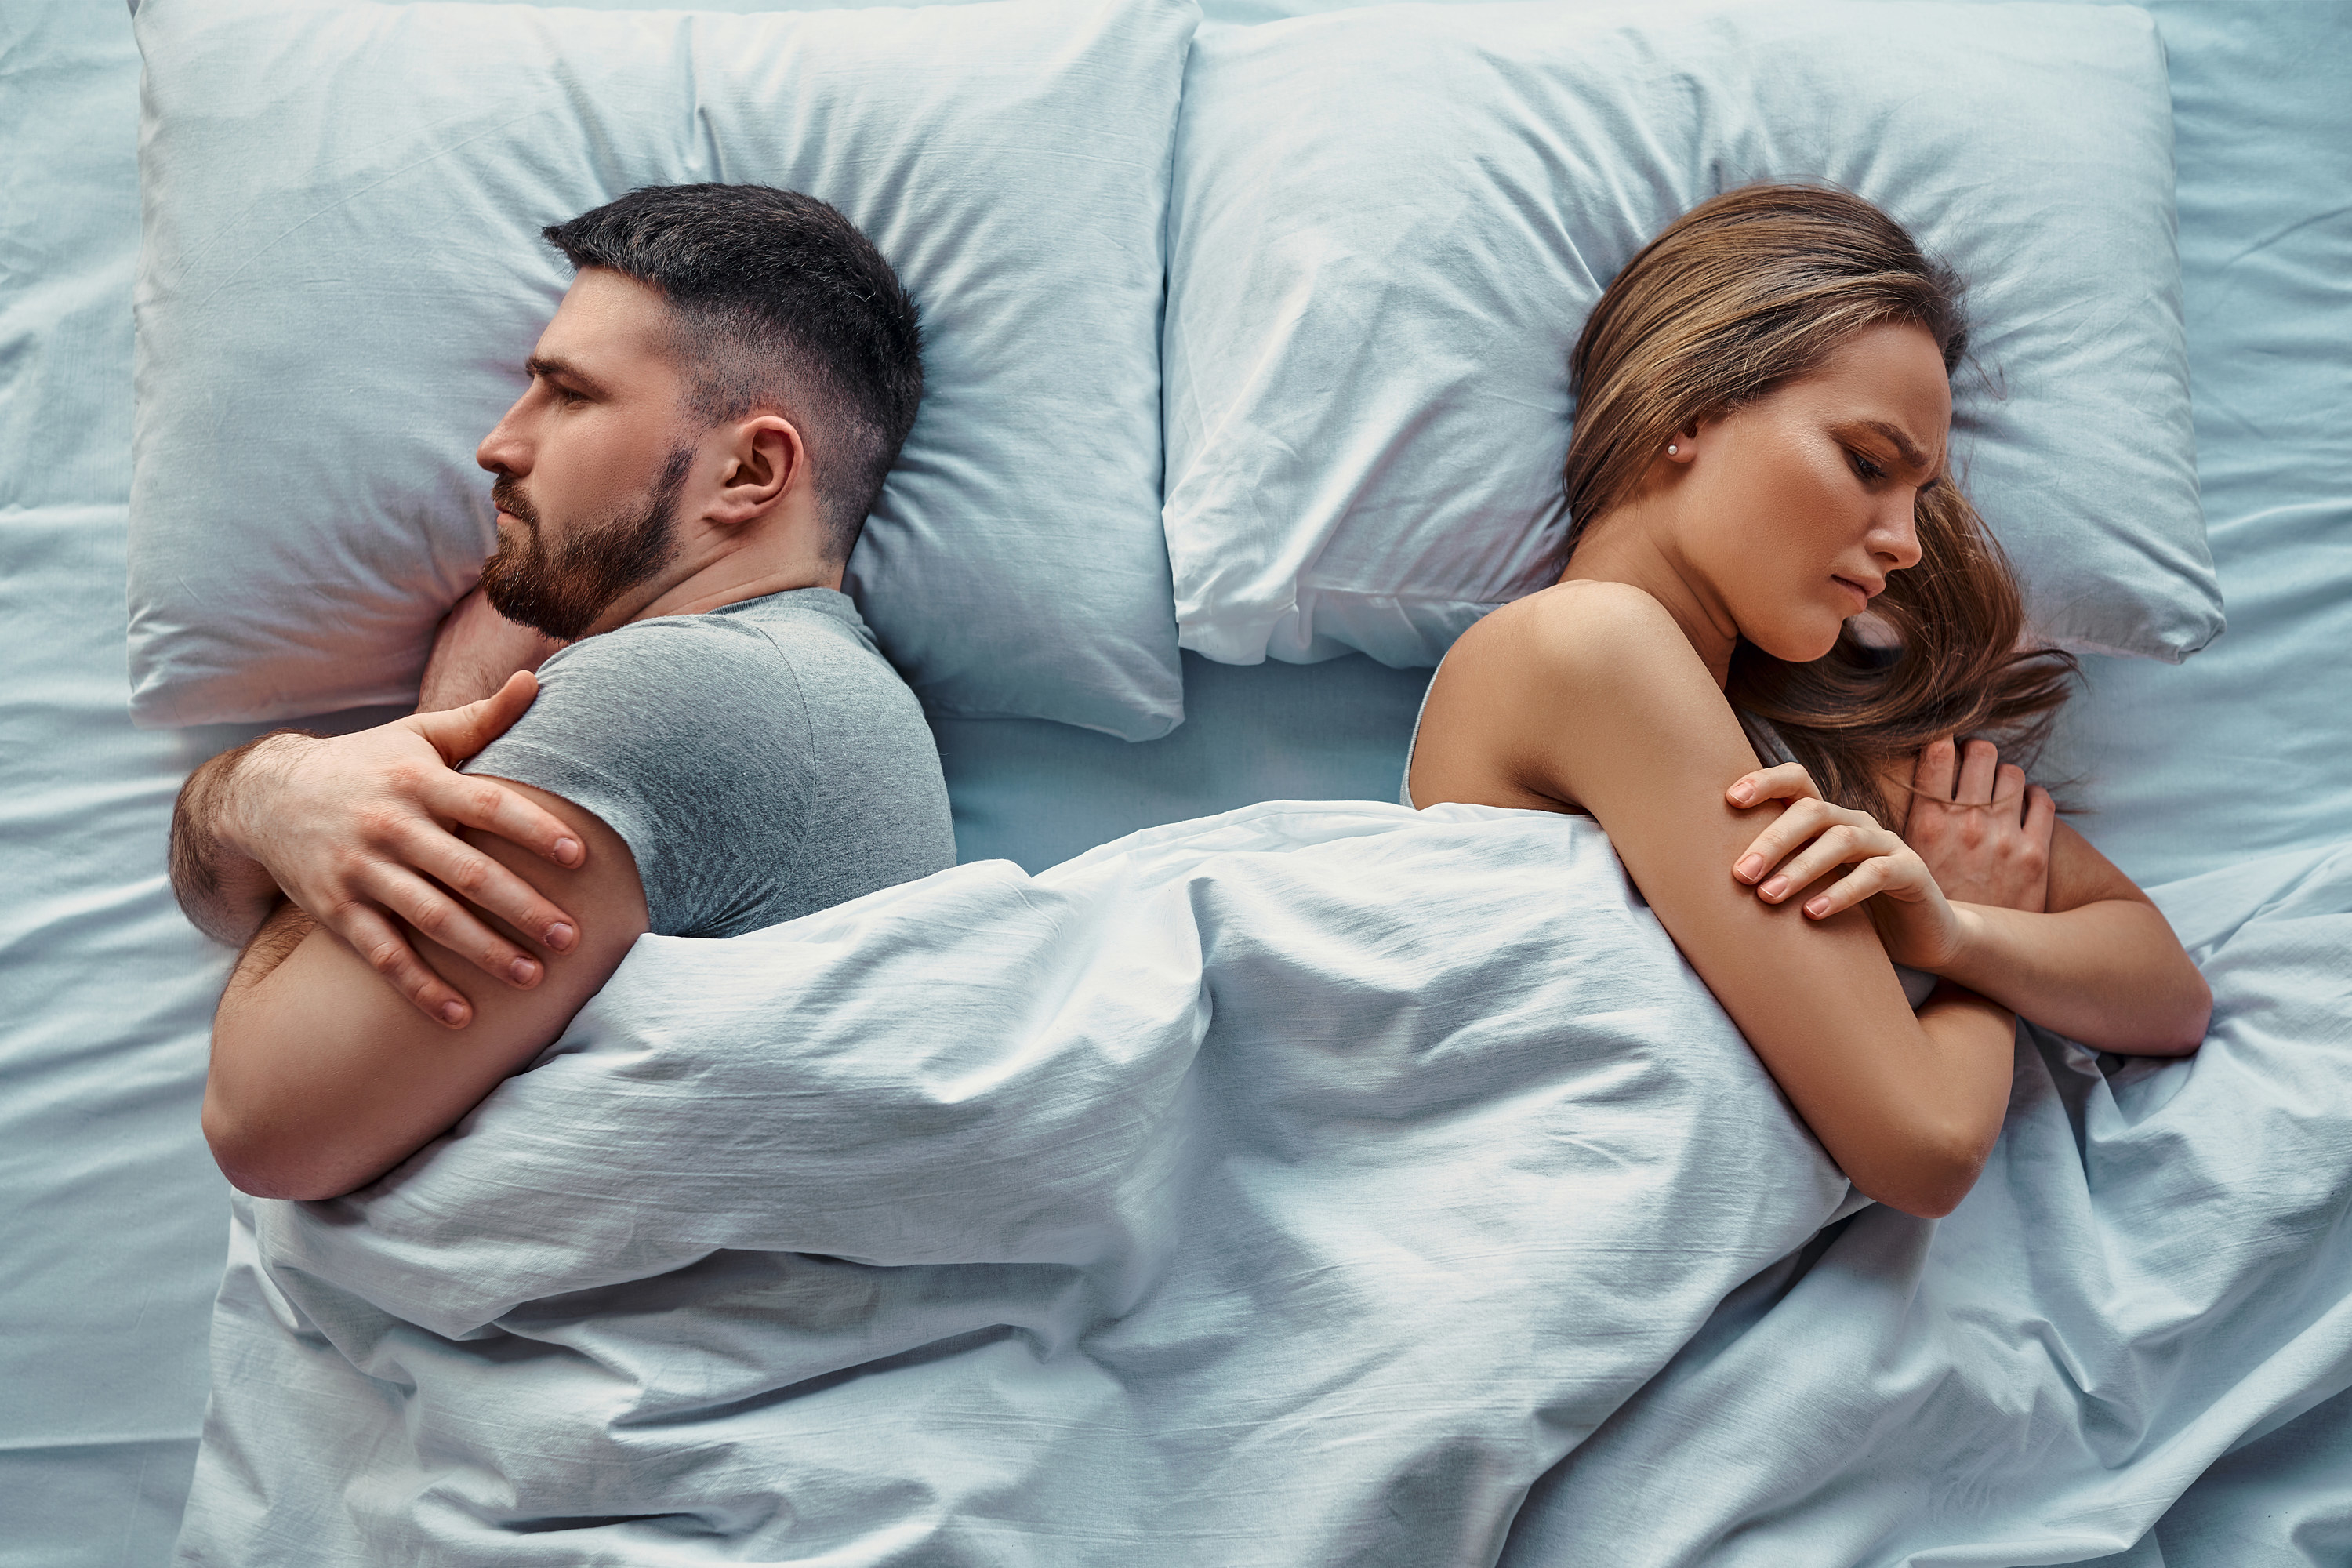 An angry man and woman facing away from each other in bed